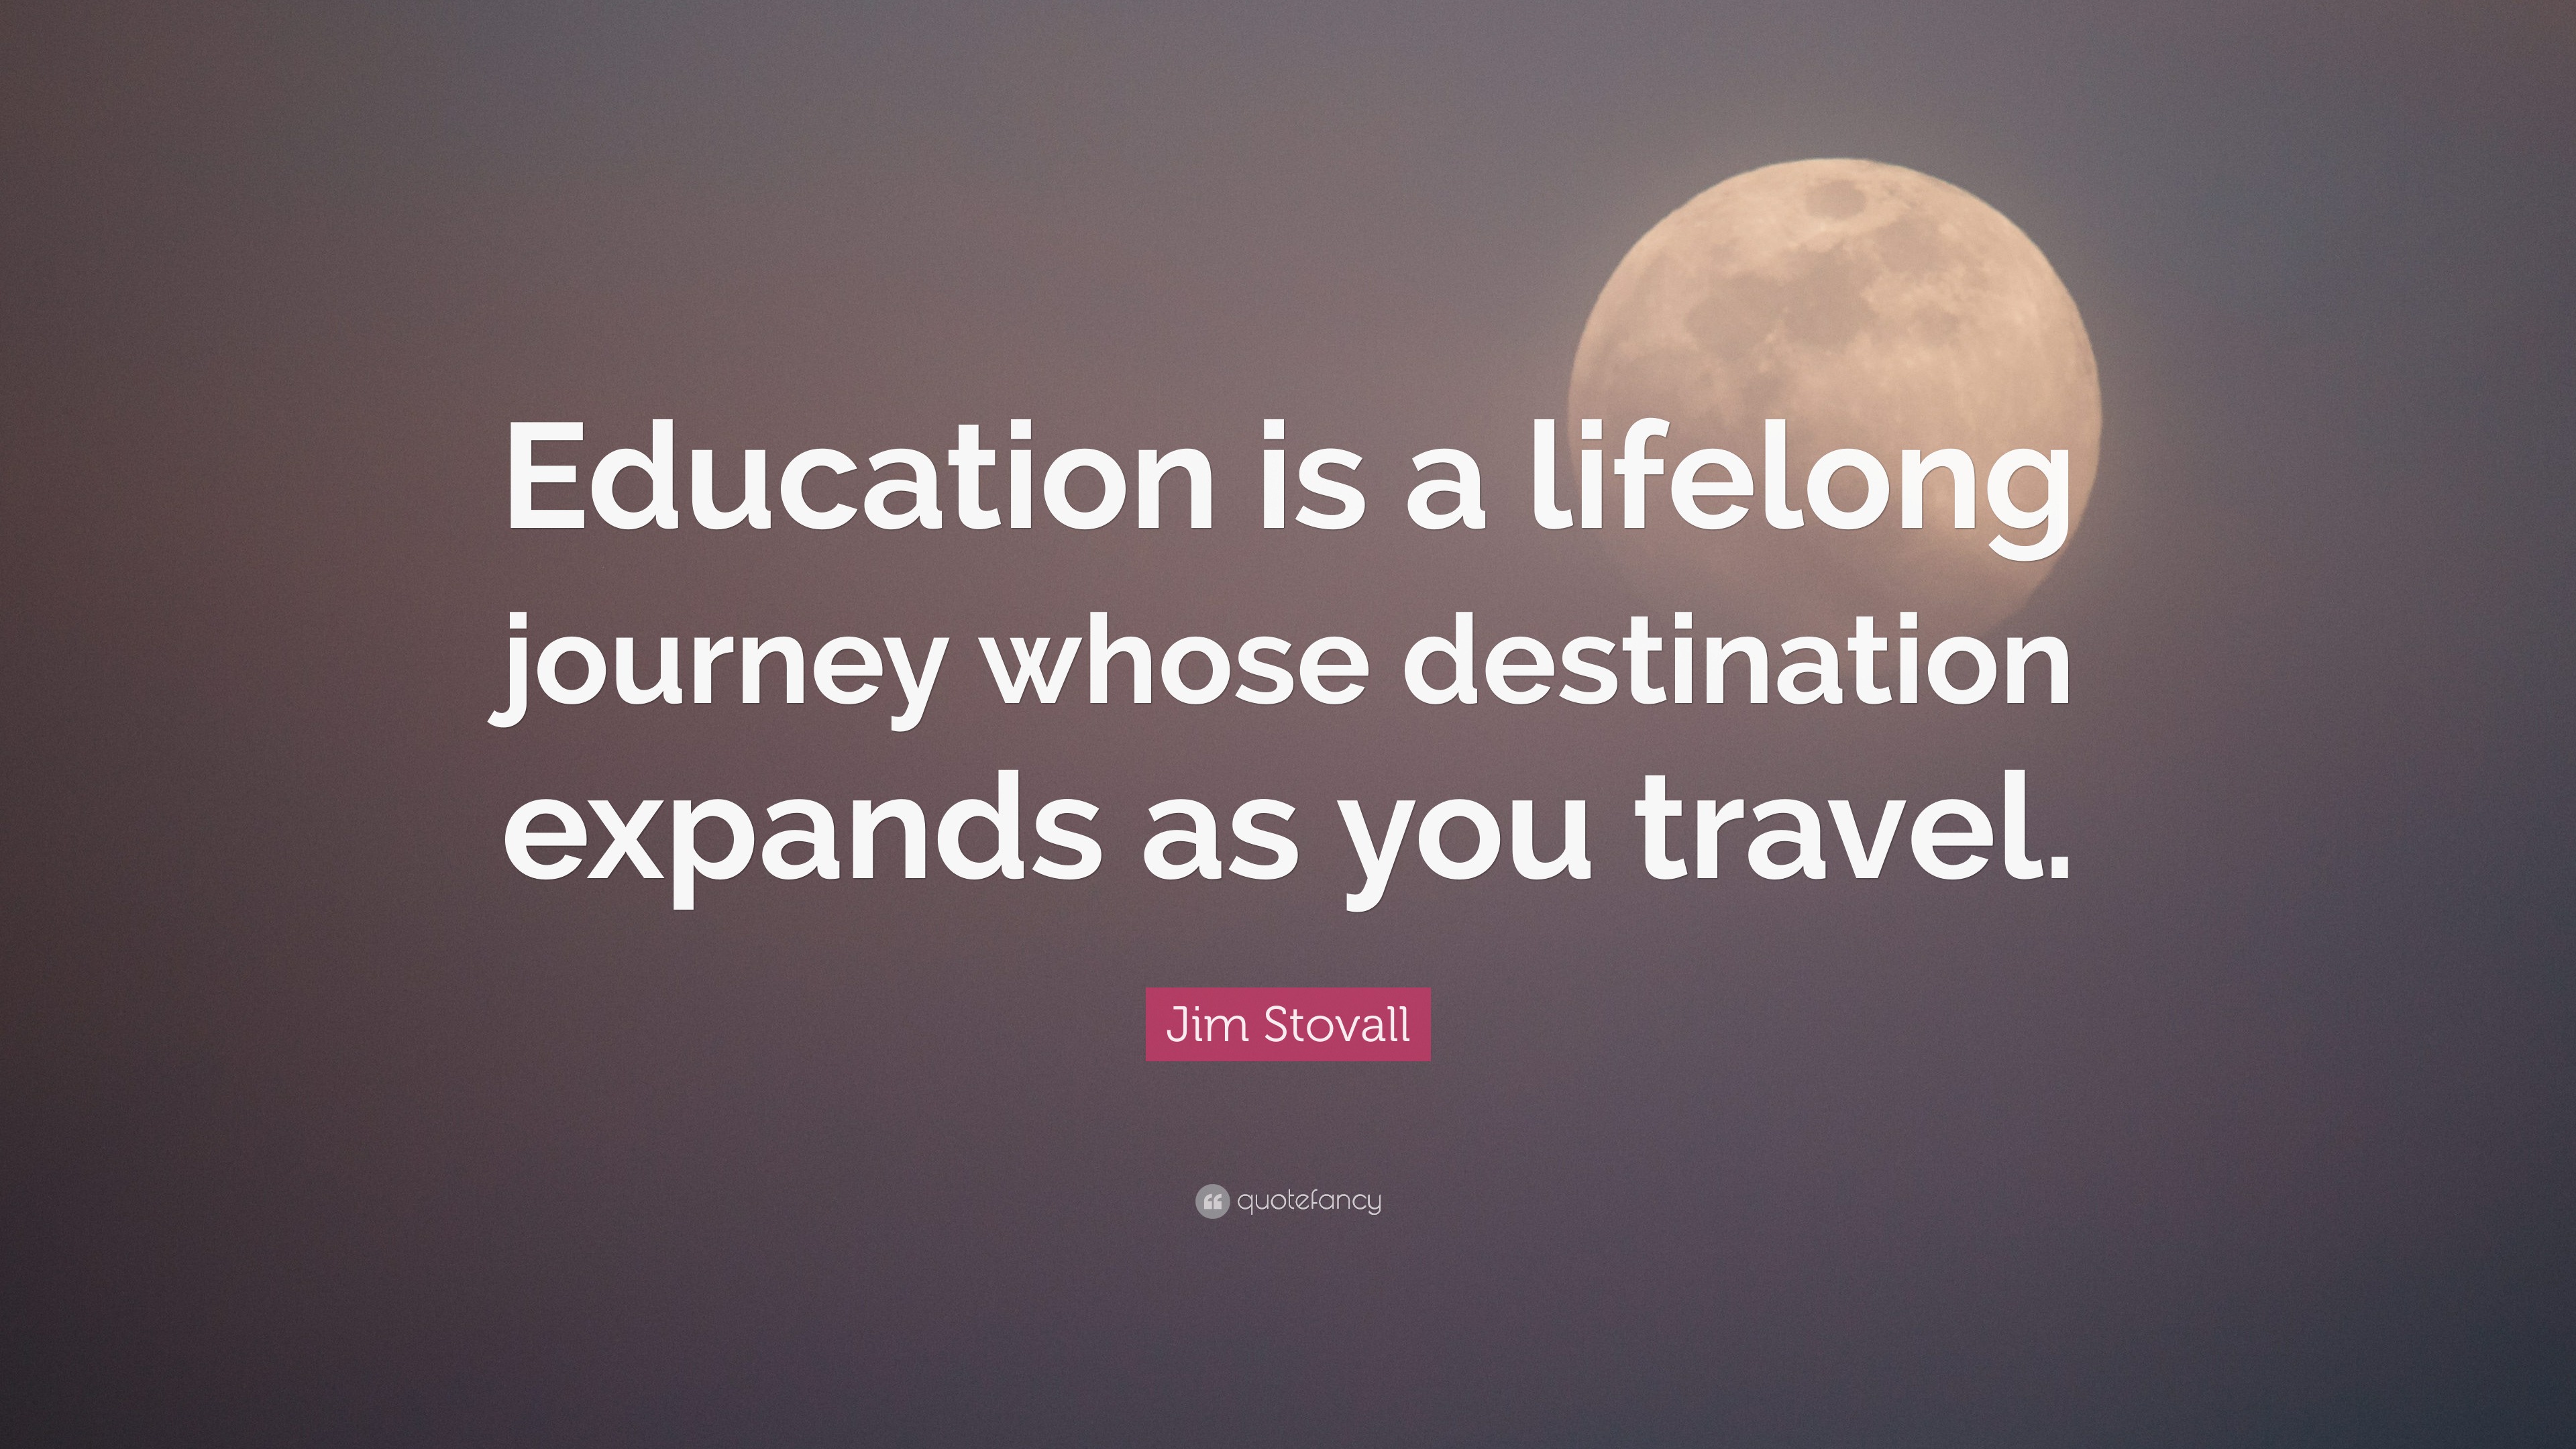 Jim Stovall Quote “education Is A Lifelong Journey Whose Destination